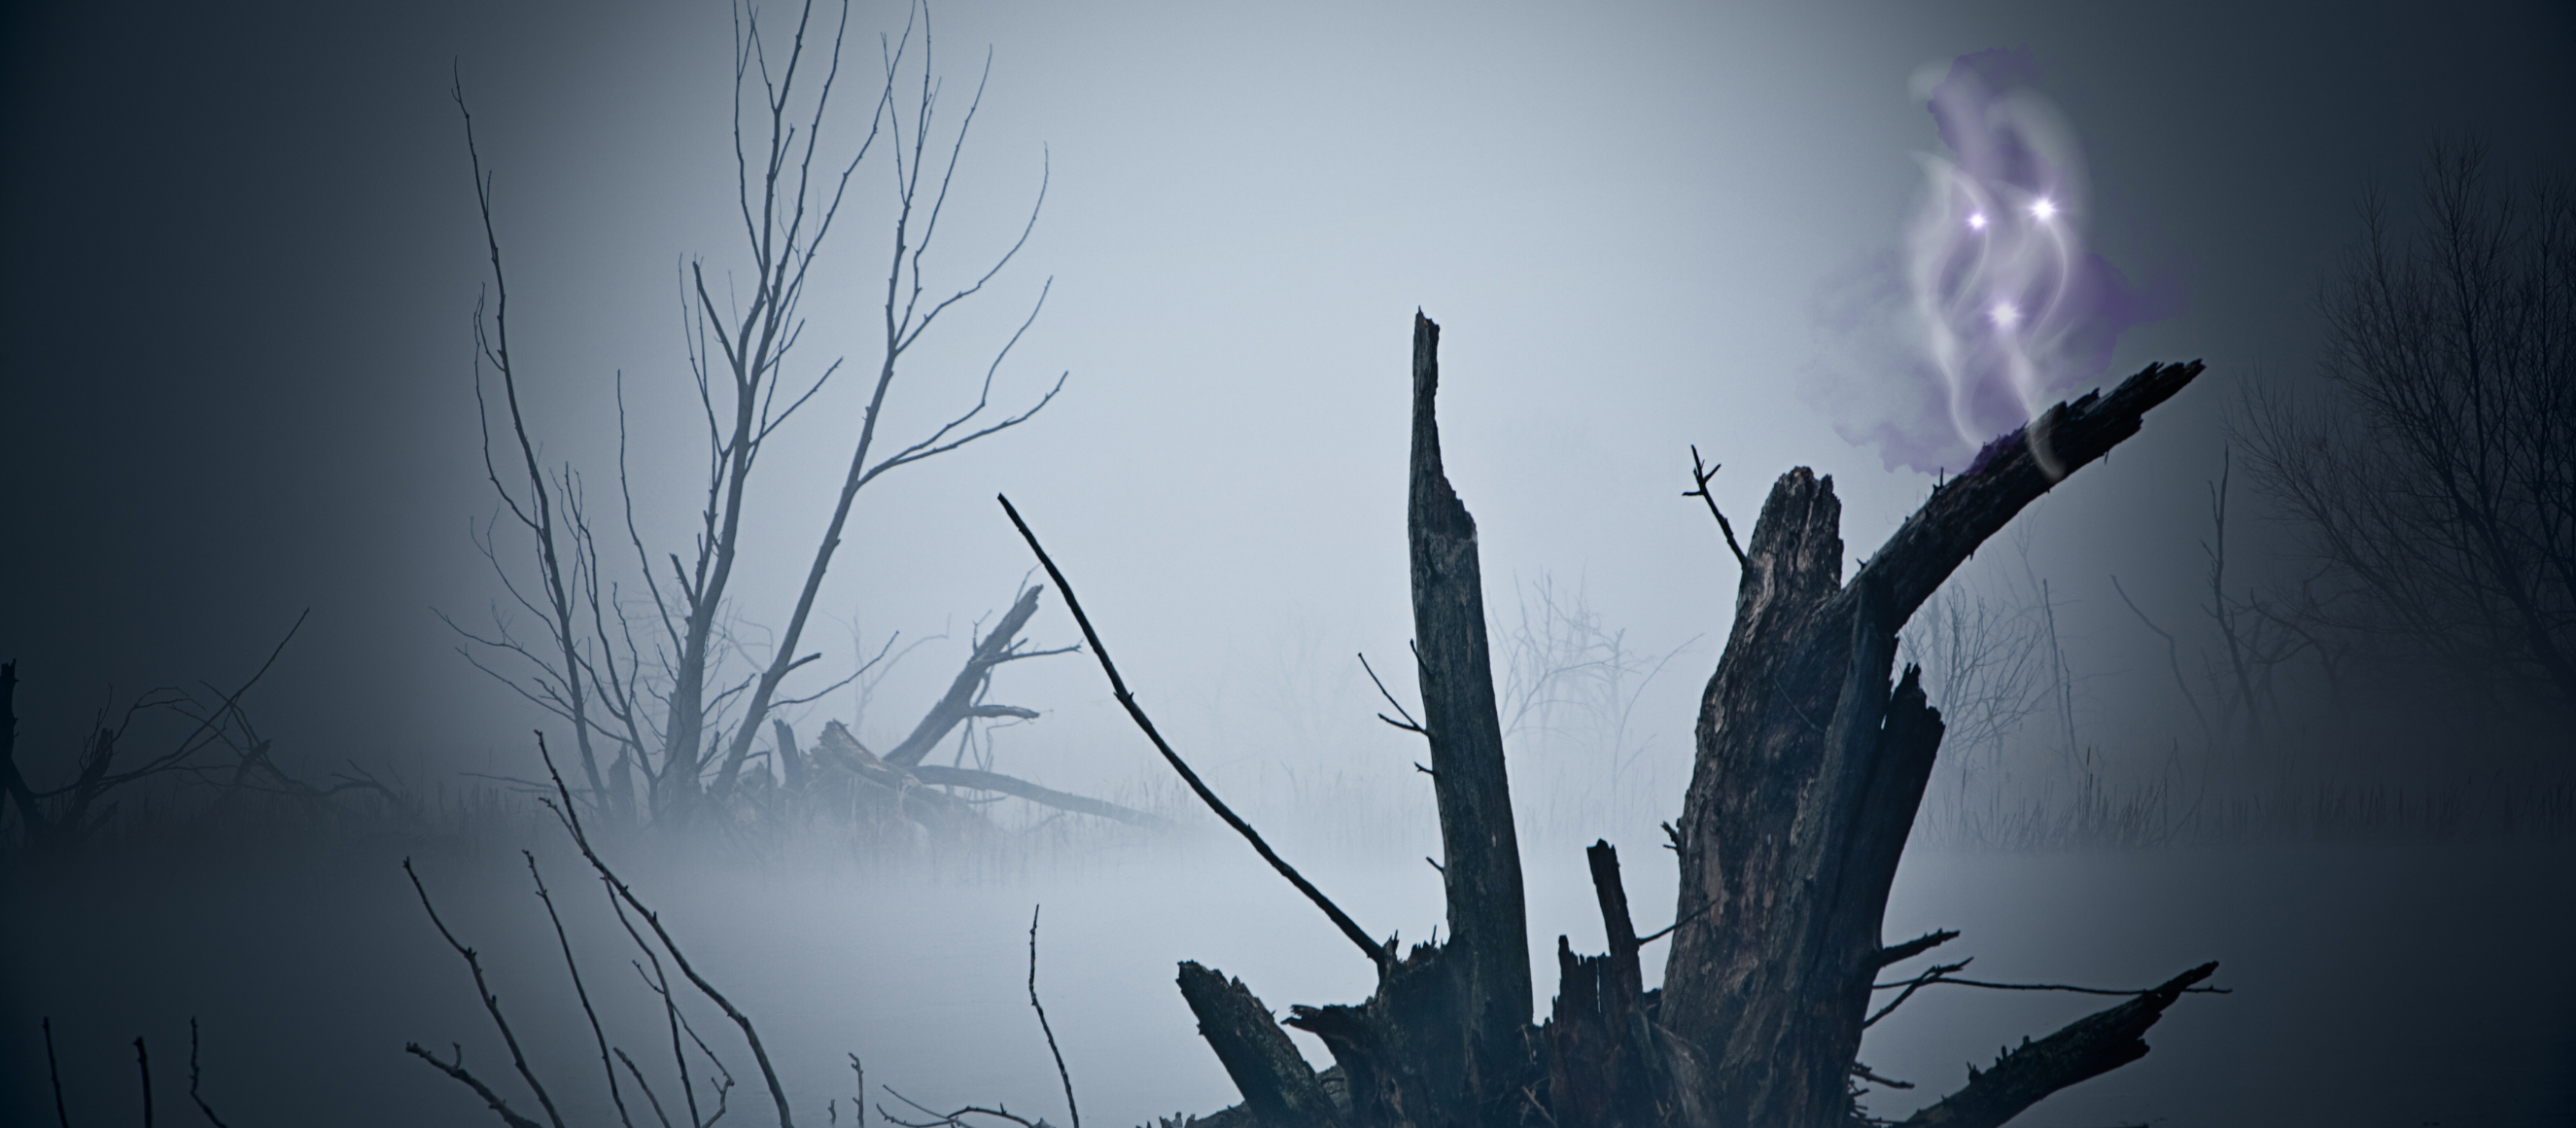 Photo of a spooky and foggy marsh/swamp